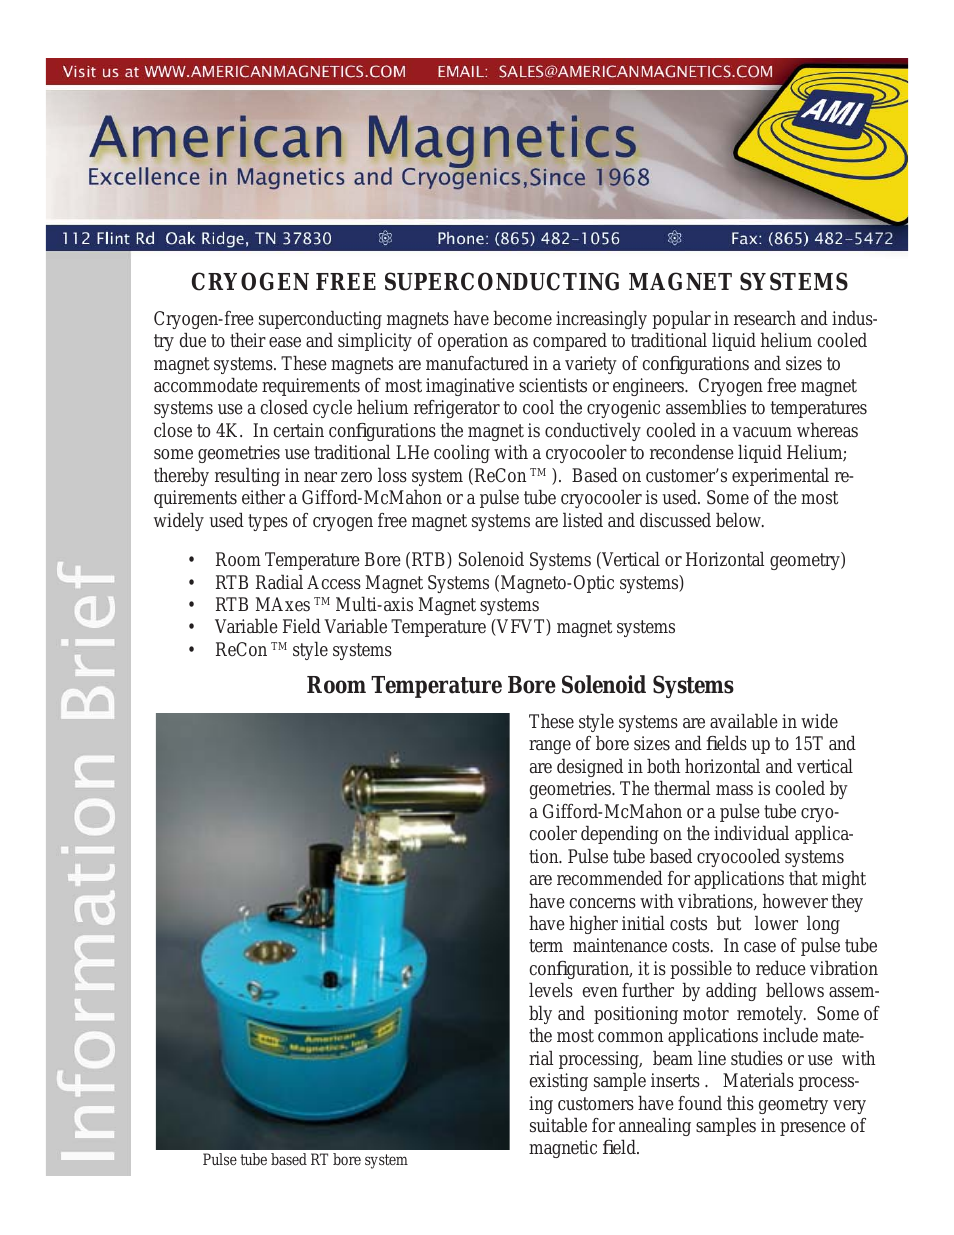 CRYOGEN FREE SUPERCONDUCTING MAGNET SYSTEMS